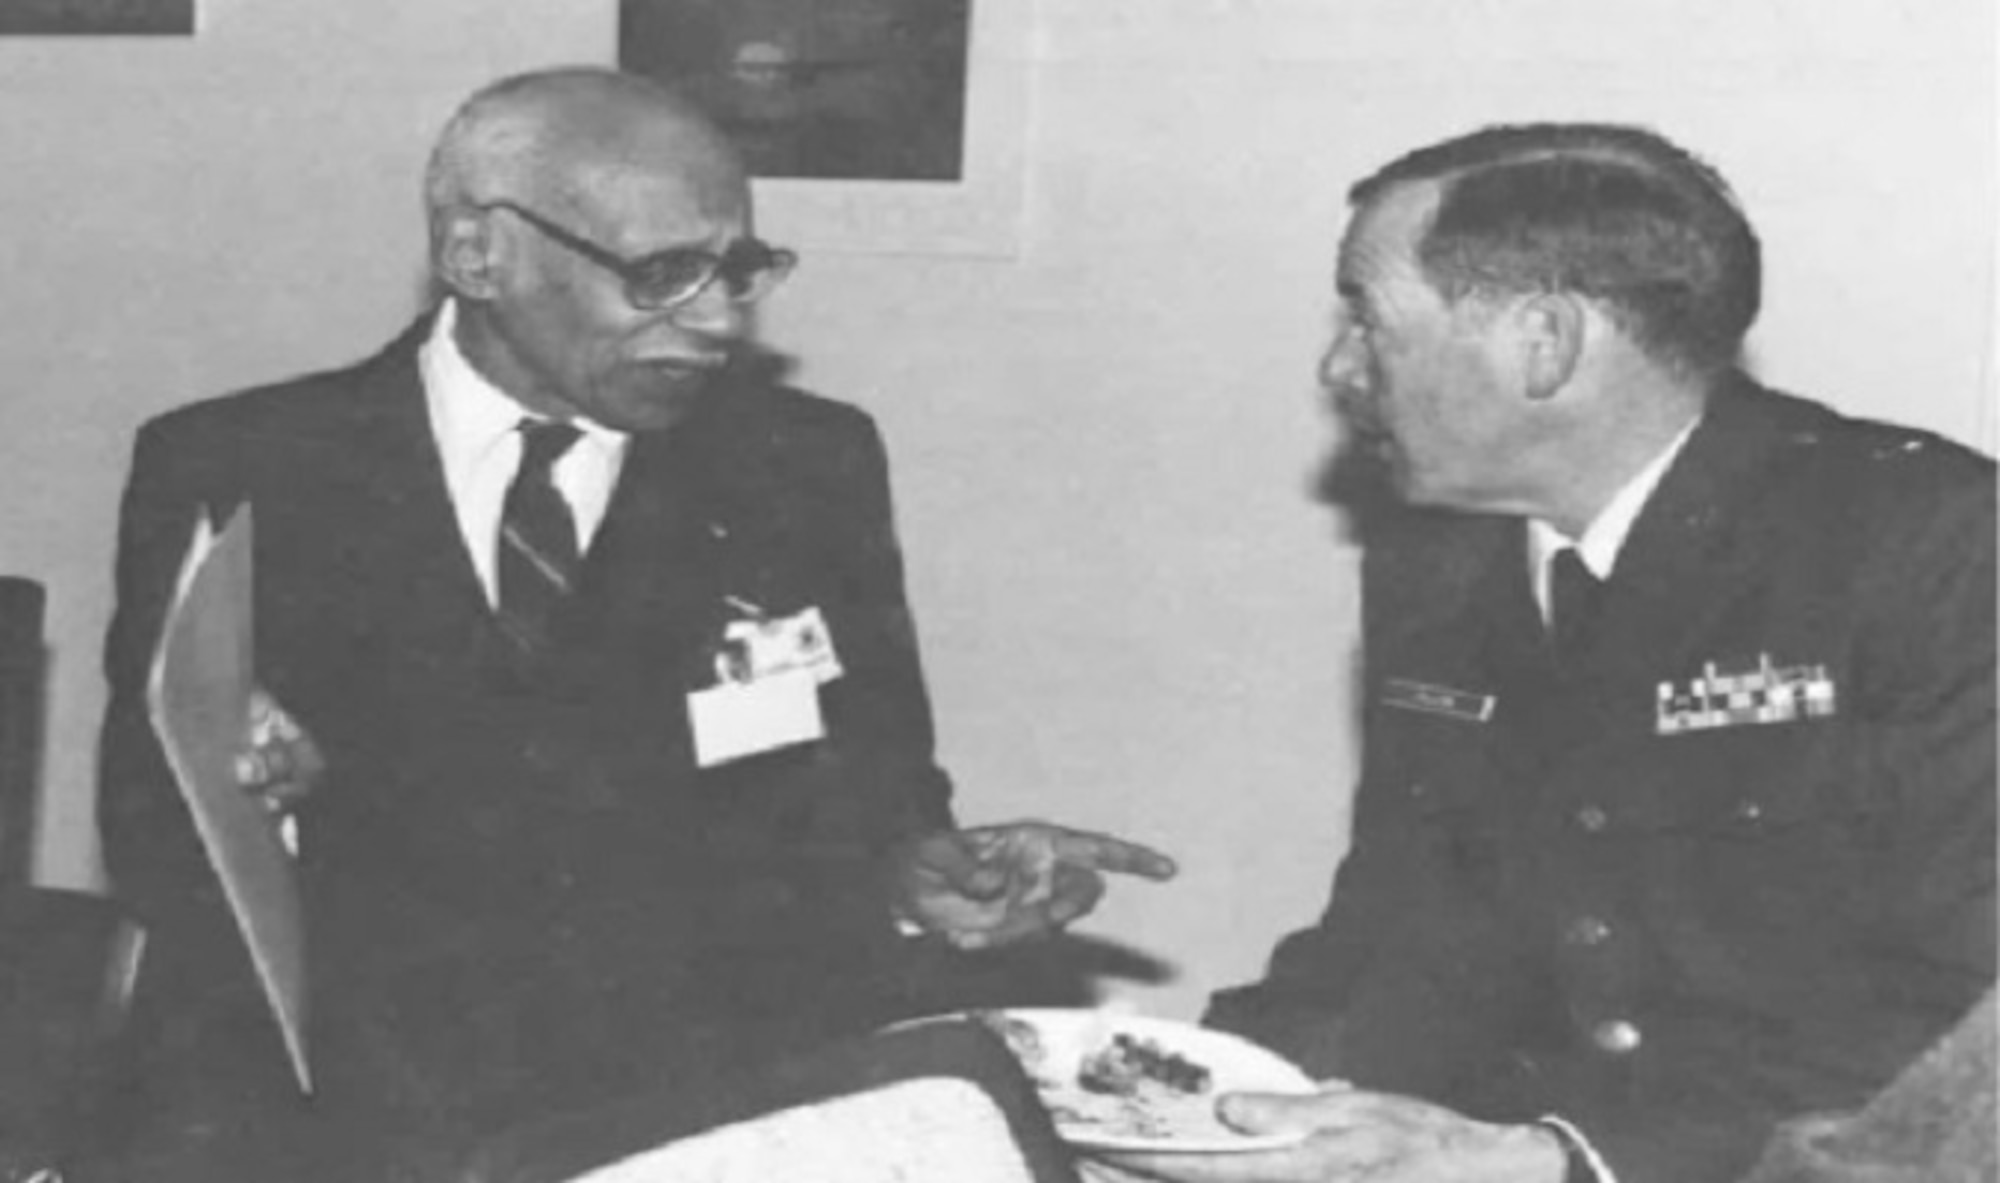 Retired Special Agent George C. Mosee (left) meets with then Office of Special Investigations Commander, Brig. Gen. Francis R. Dillon, during a Feb. 14, 1991, Black Heritage Month event at OSI headquarters. Mosee was one of the first five African Americans to serve in OSI. (U.S. Air Force photo)